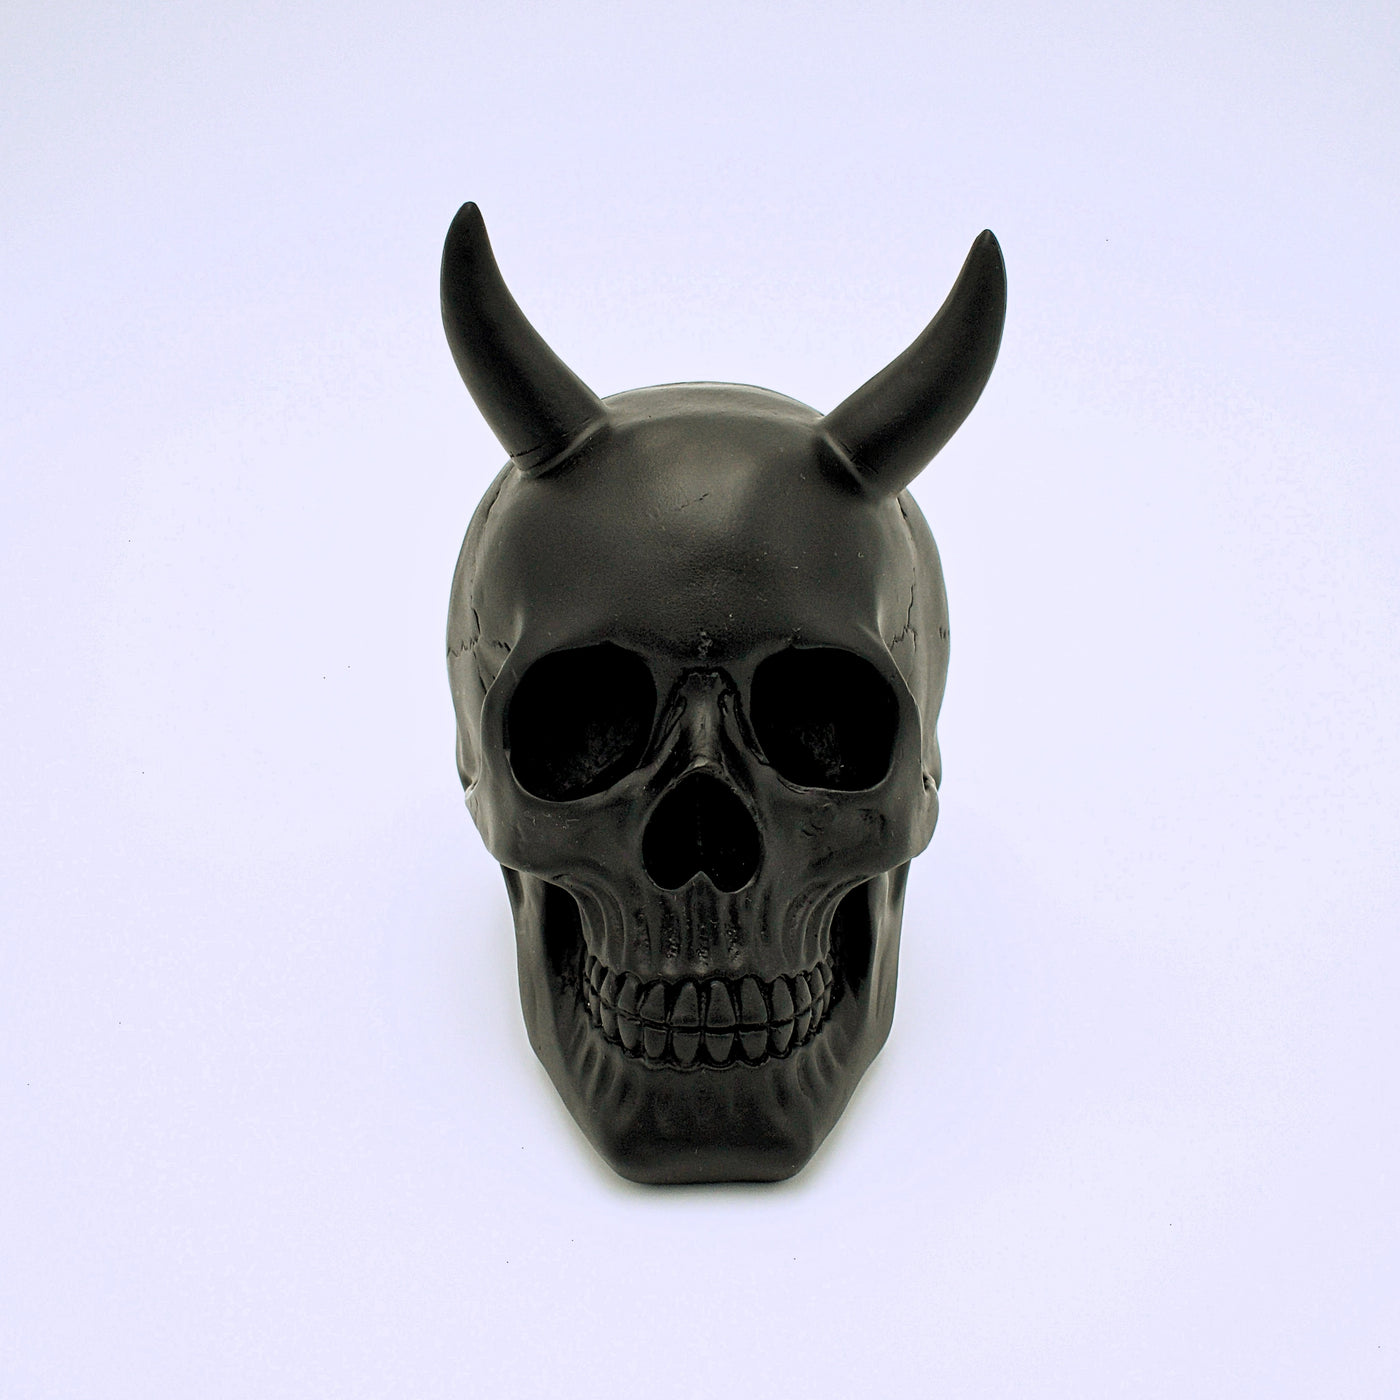 Black Horned Skull Sculpture - The Cranio Collections